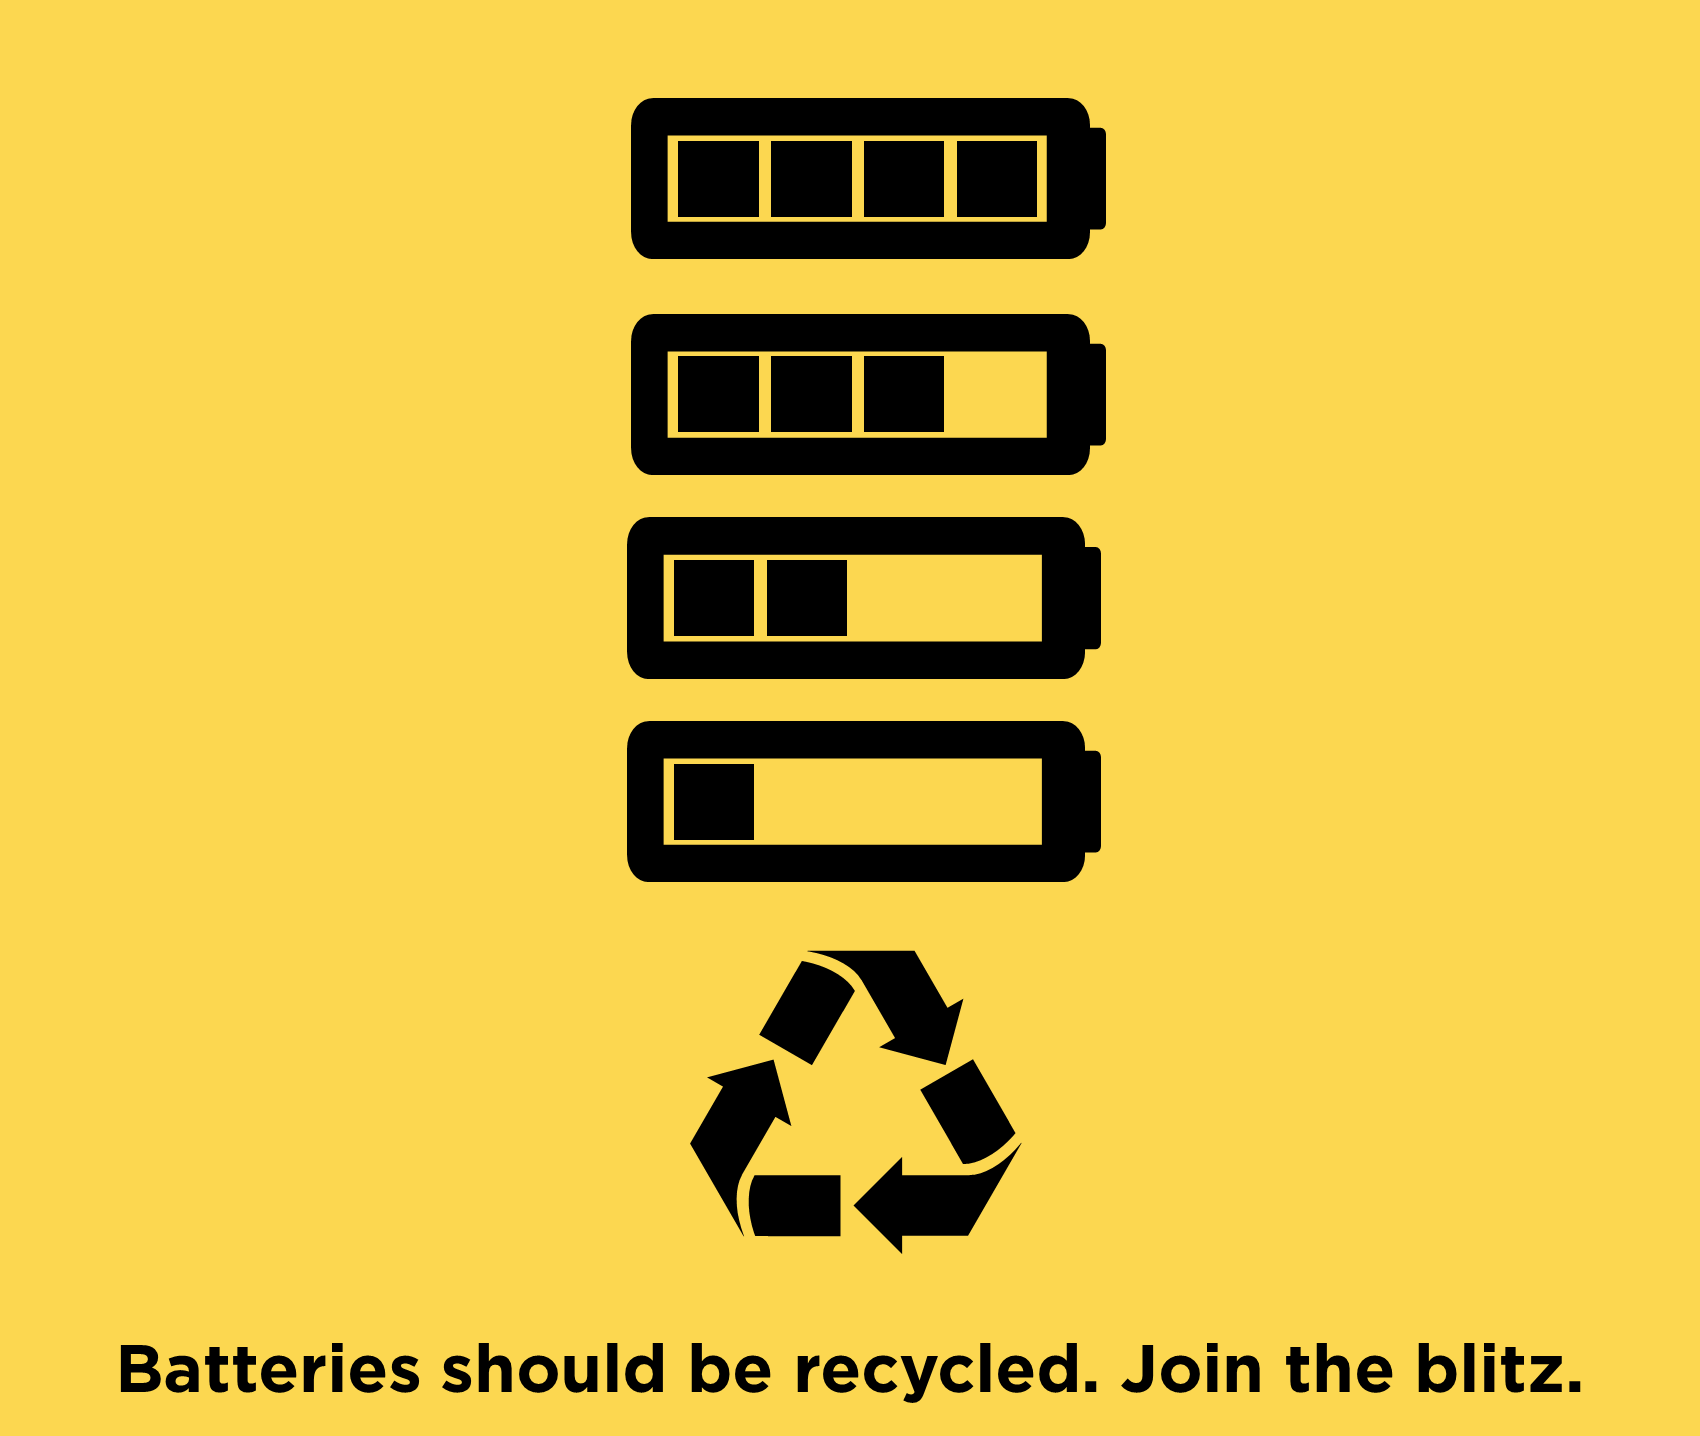 Batteries should be recycled. Join the blitz.